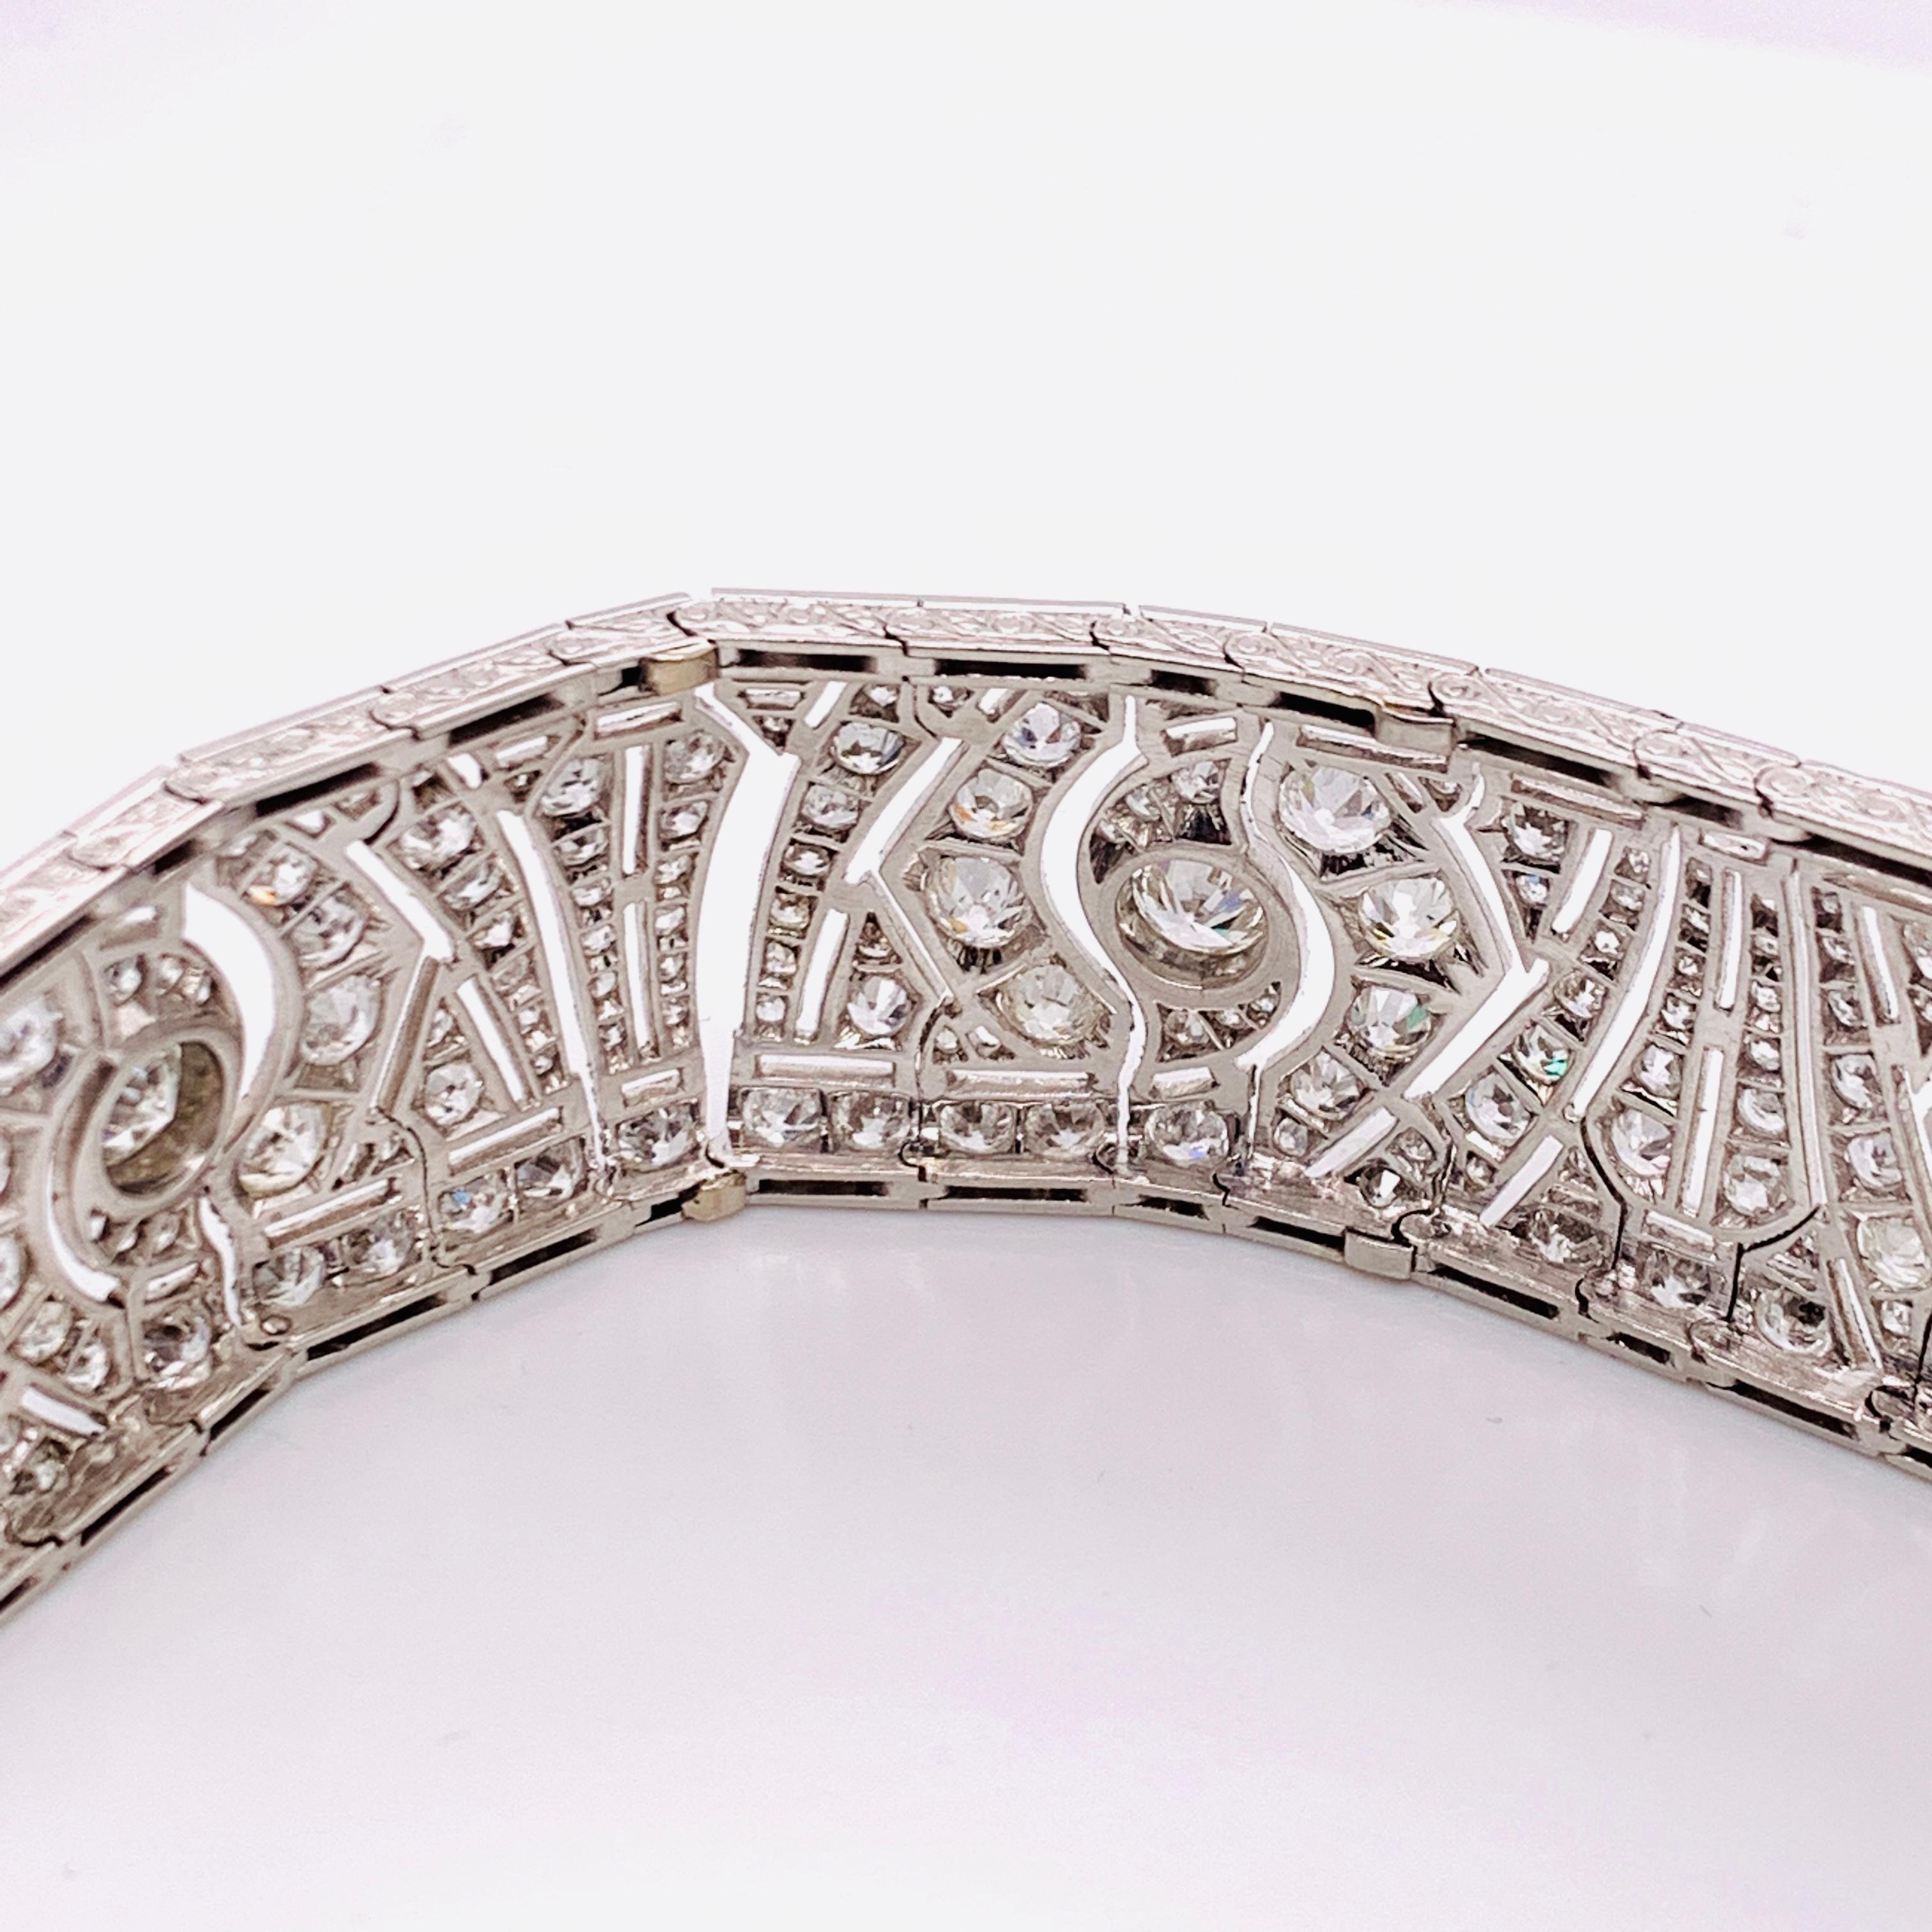 French Art Deco Diamond Platinum Bracelet In Good Condition For Sale In London, GB